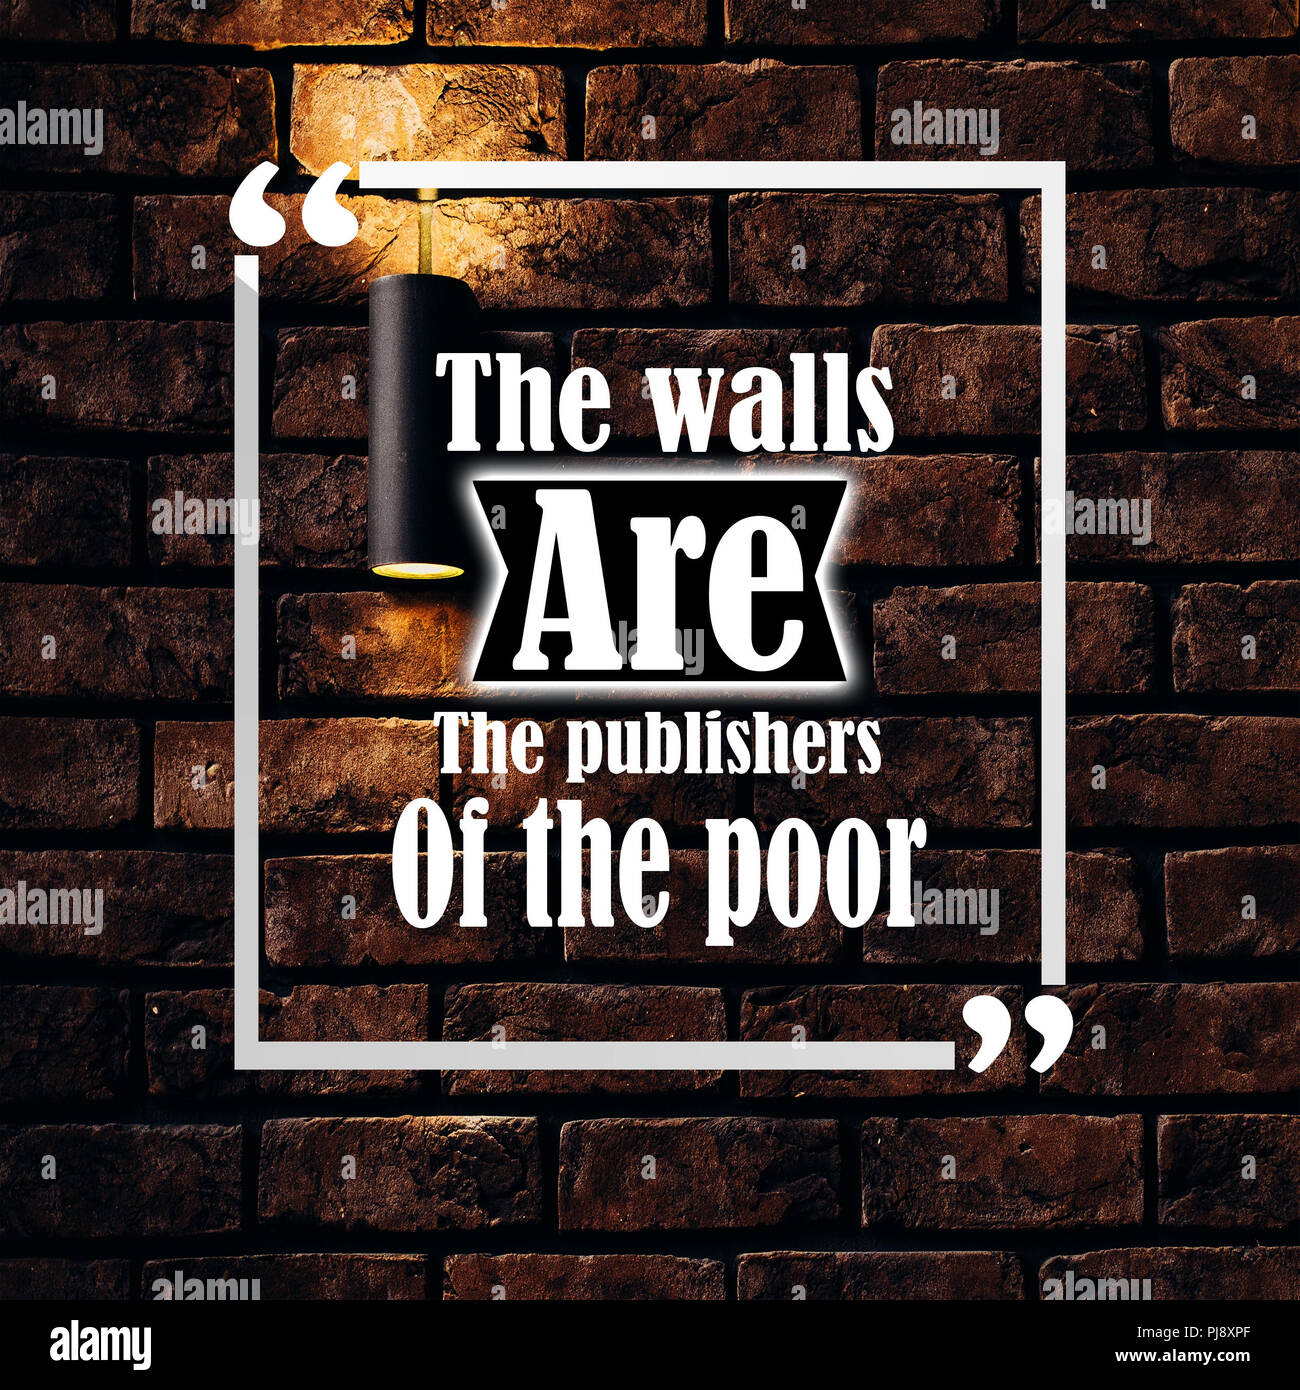 Inspirational Quotes: The walls are the publishers of the poor, positive, motivation, inspiration Stock Photo